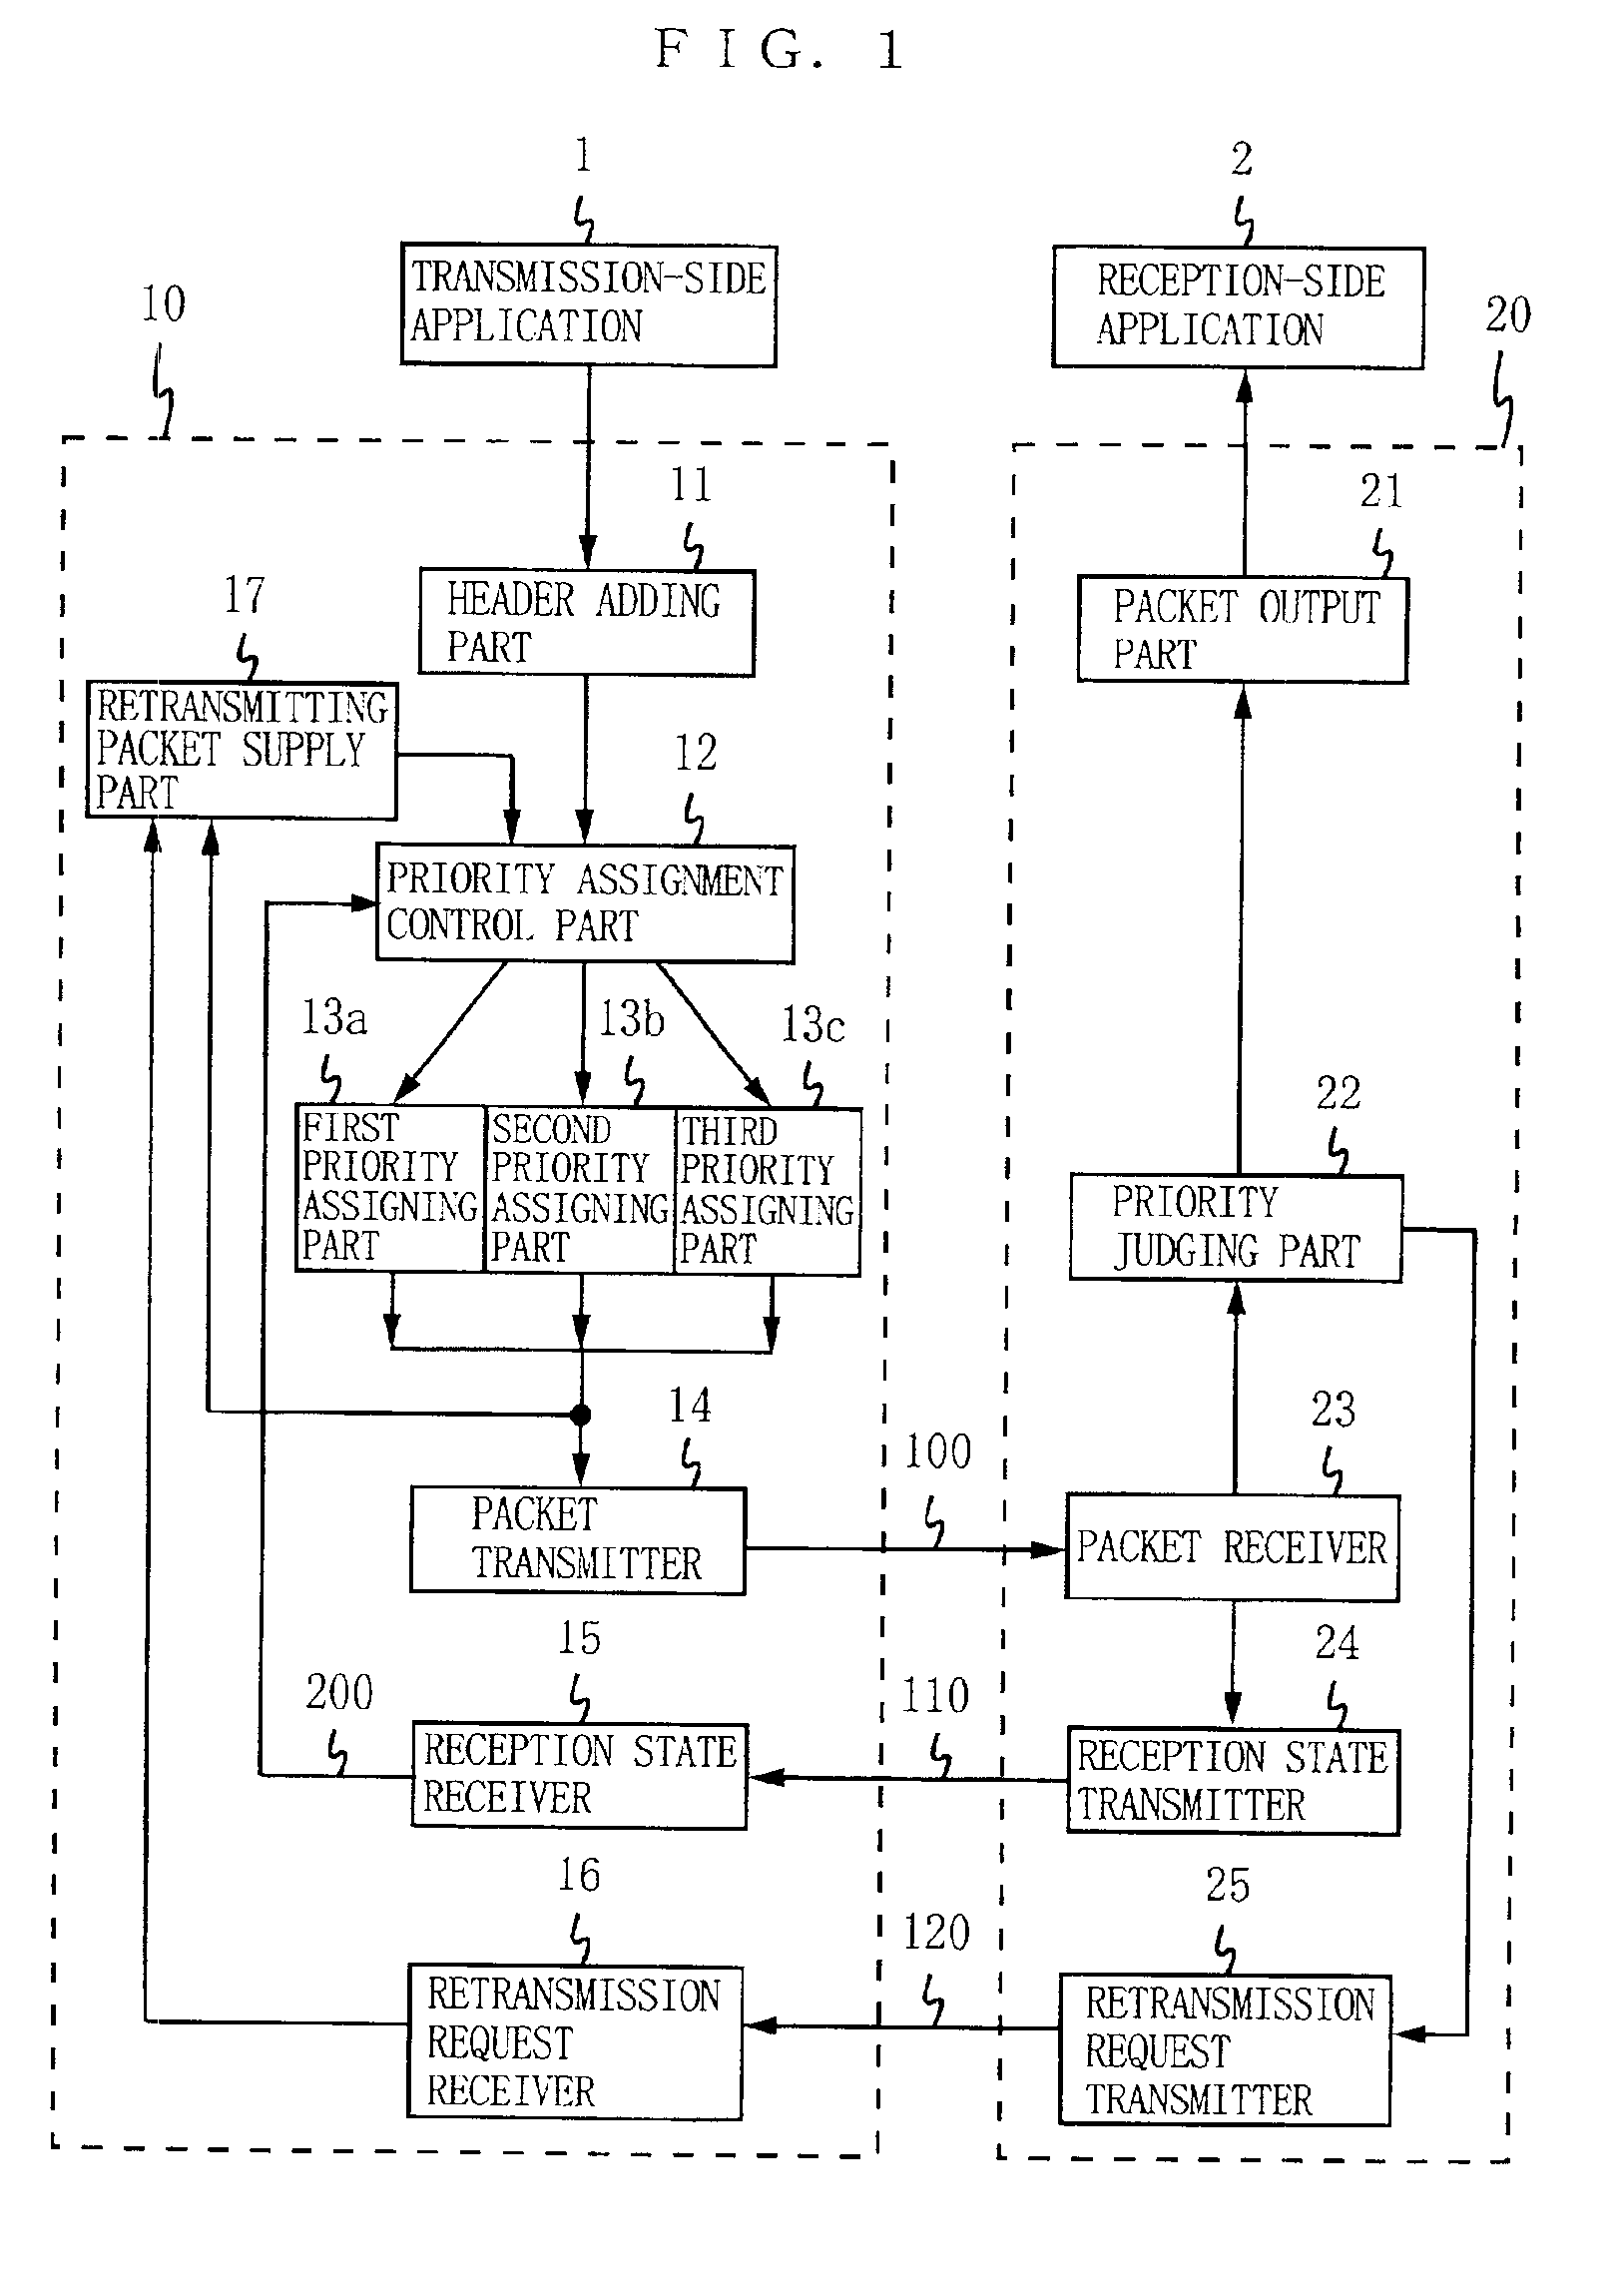 Transmission apparatus and method for changing data packets priority assignment depending on the reception feedback